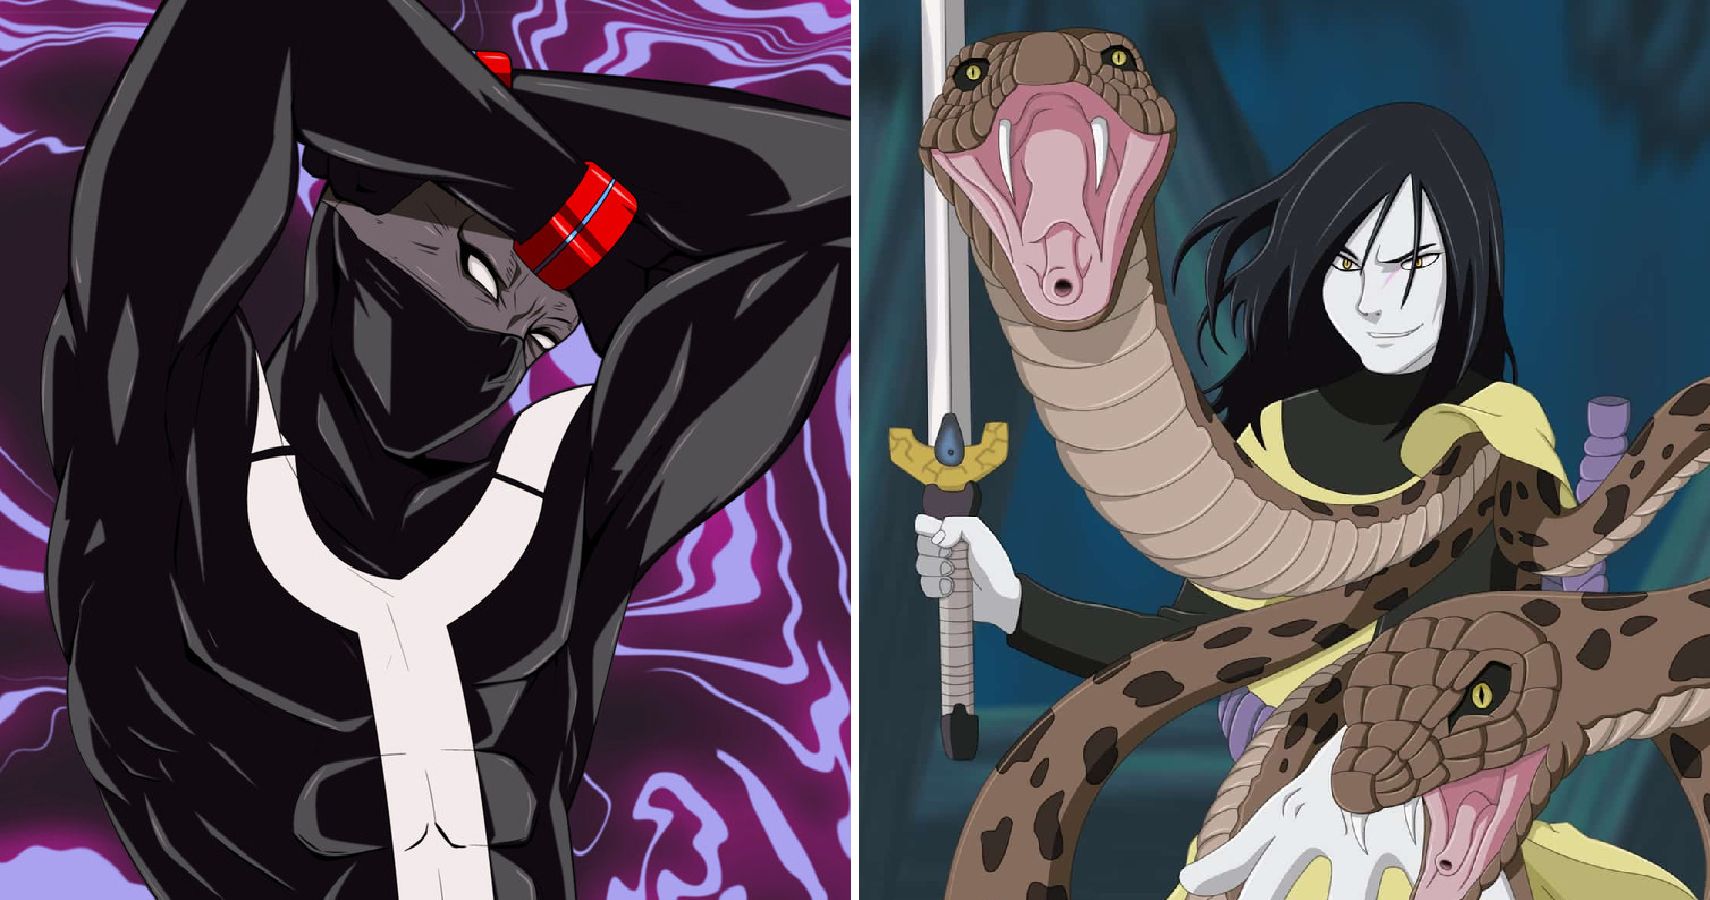 The 13 Strongest Anime Villains Of All Time (And The 12 Weakest)